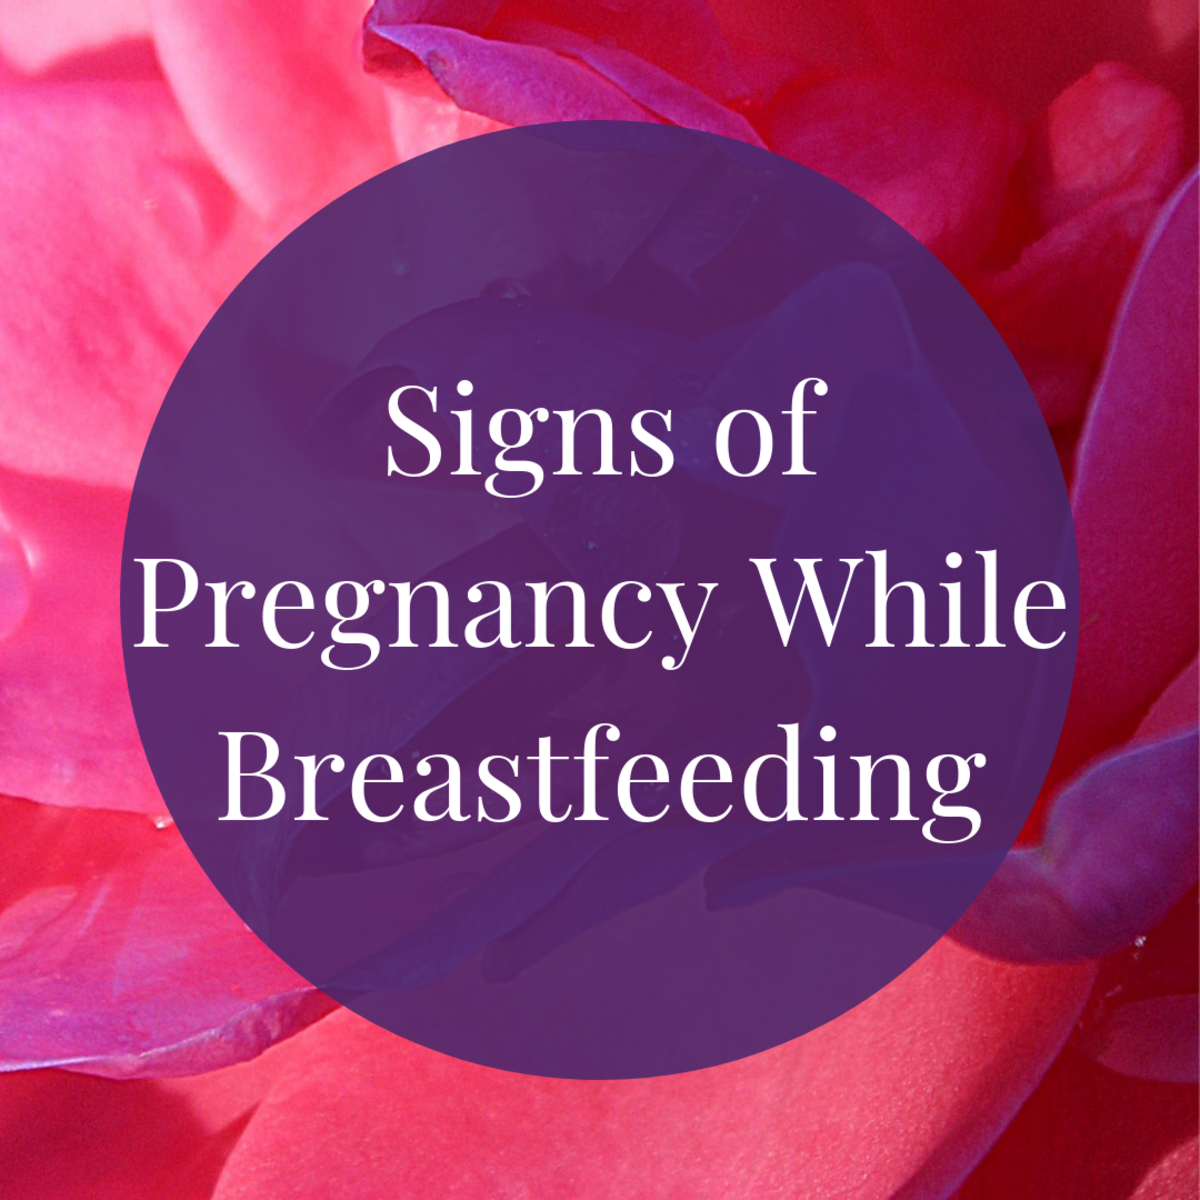 How to Recognize the Signs of Pregnancy While Breastfeeding